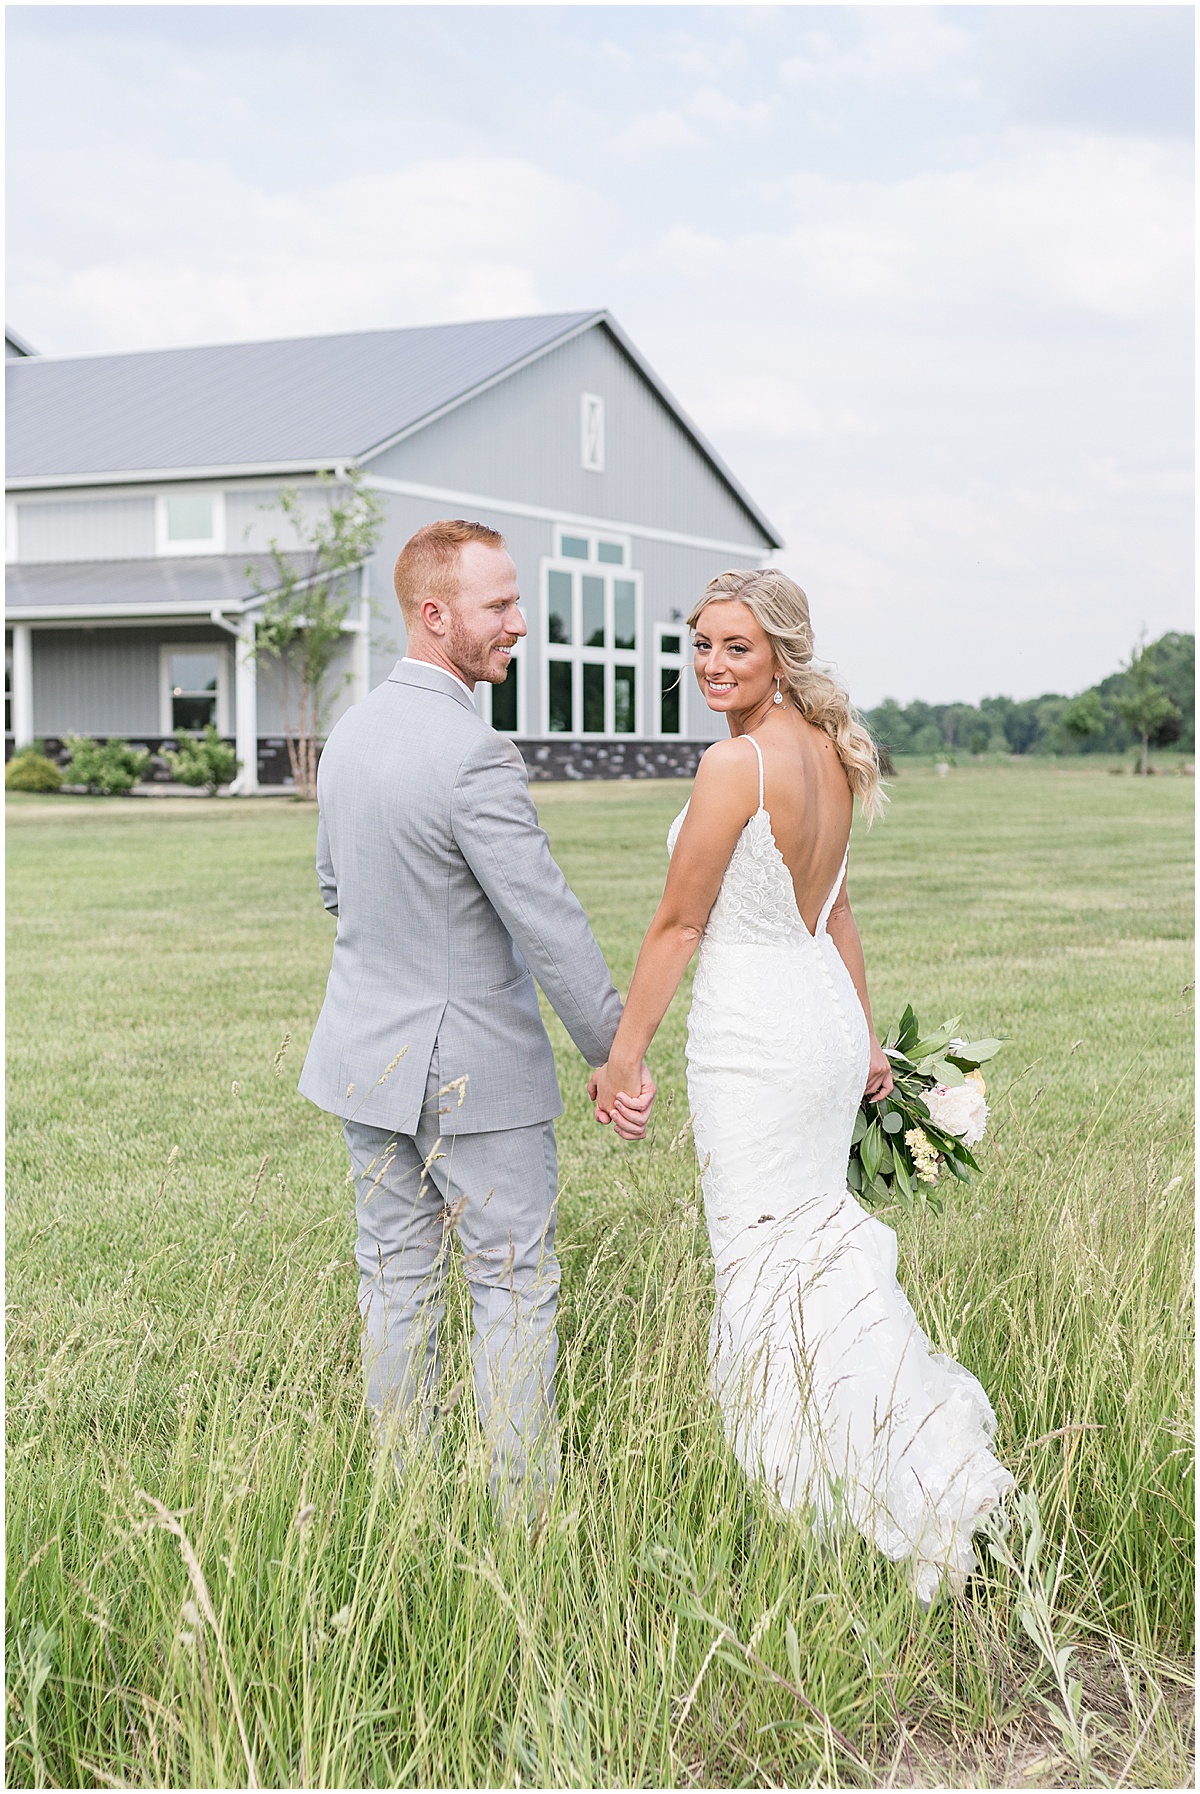 Groom leads bride through field after wedding at New Journey Farms in Lafayette, Indiana